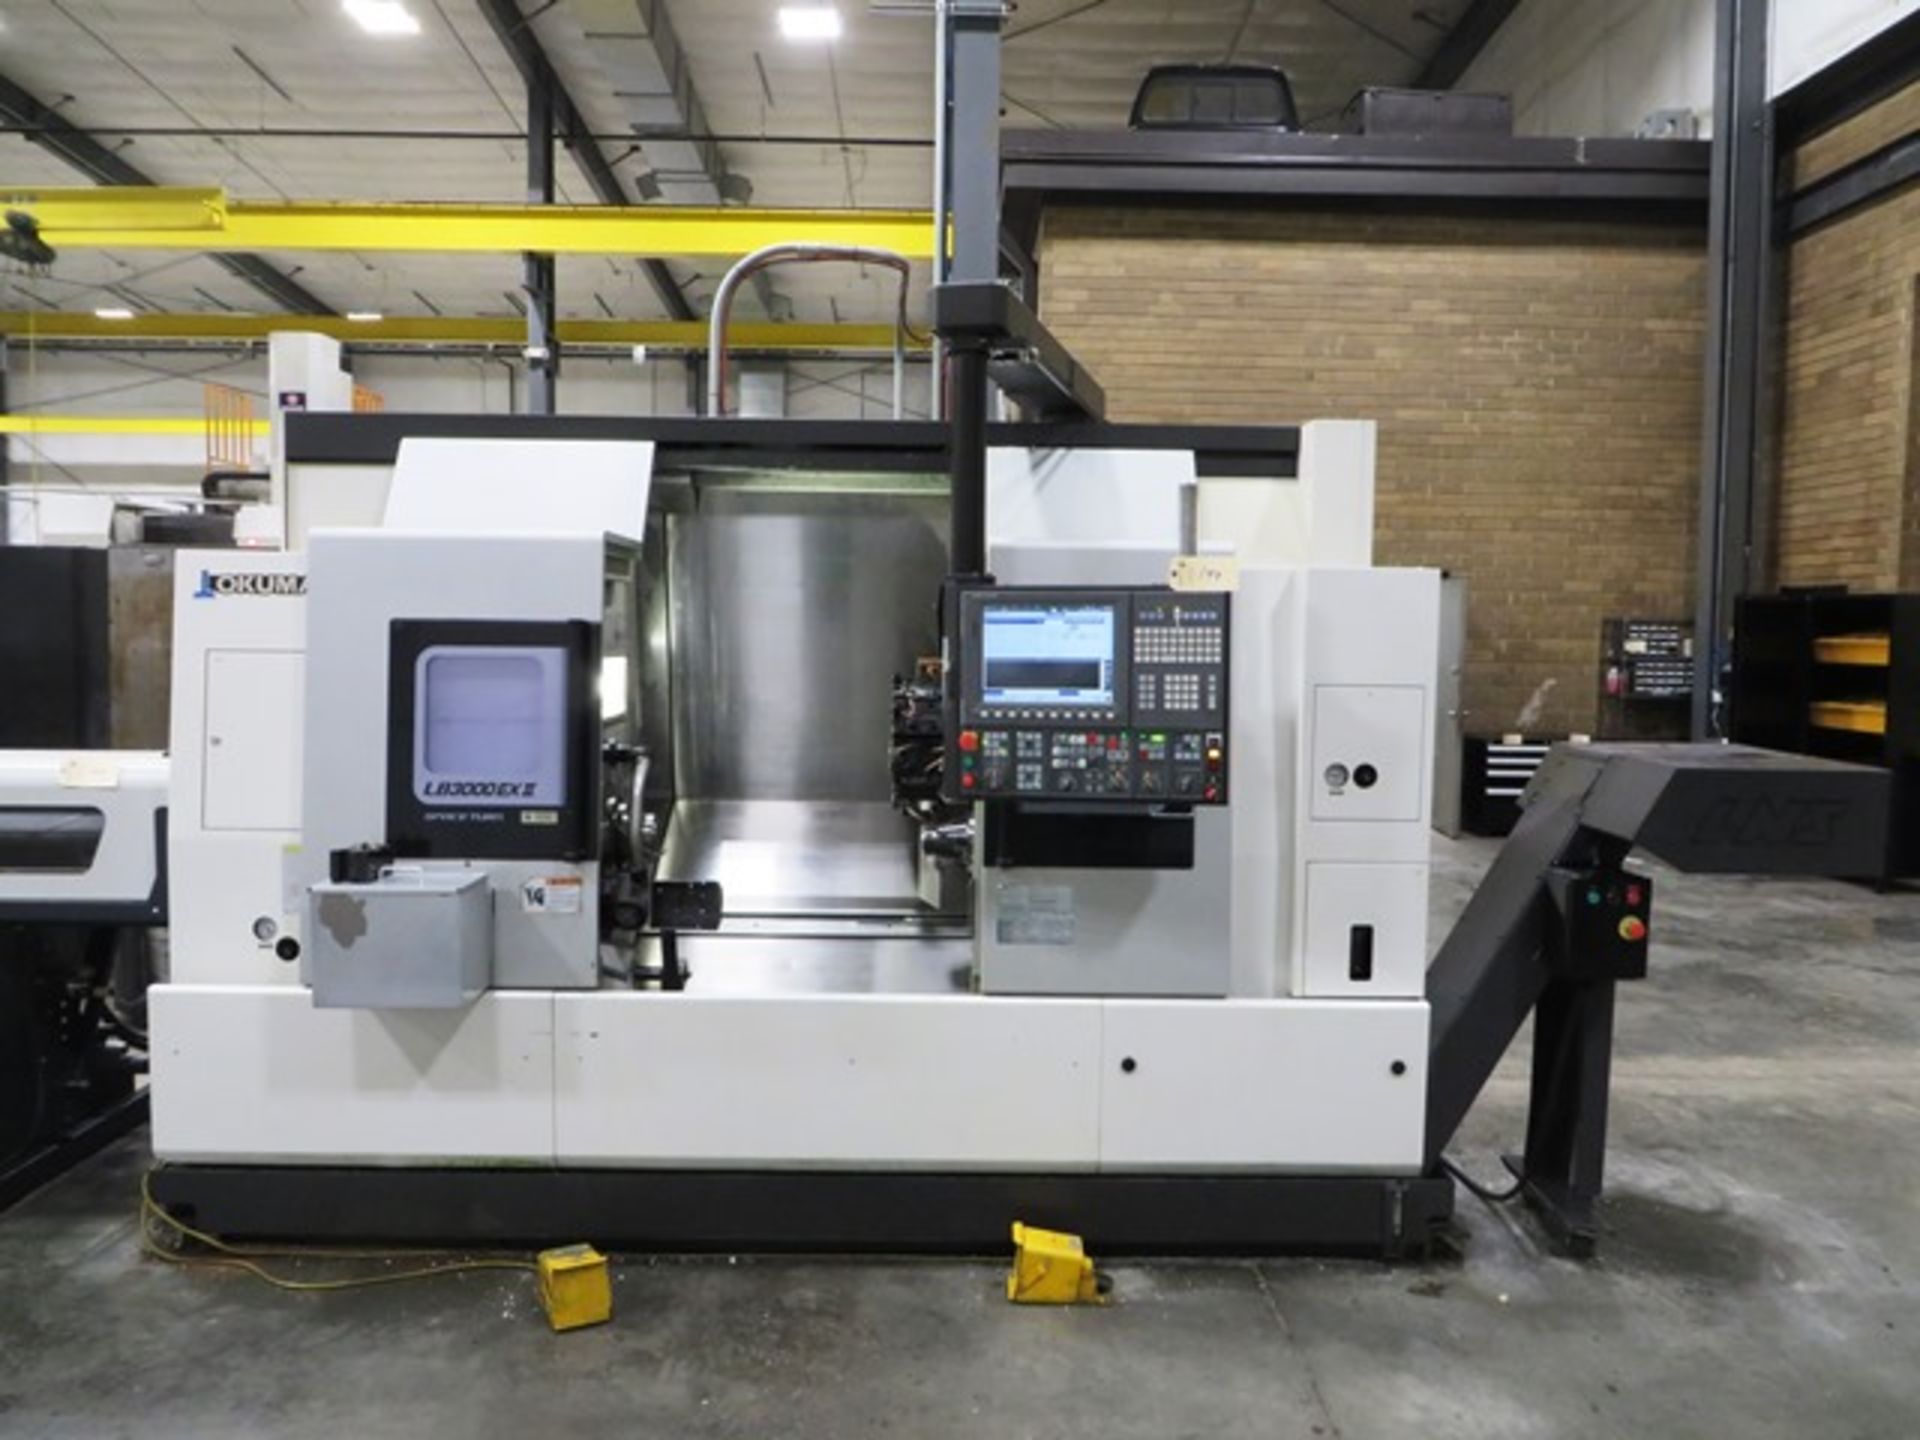 Okuma LB-3000EXII Spaceturn 5-Axis Dual Spindle CNC Turning Center